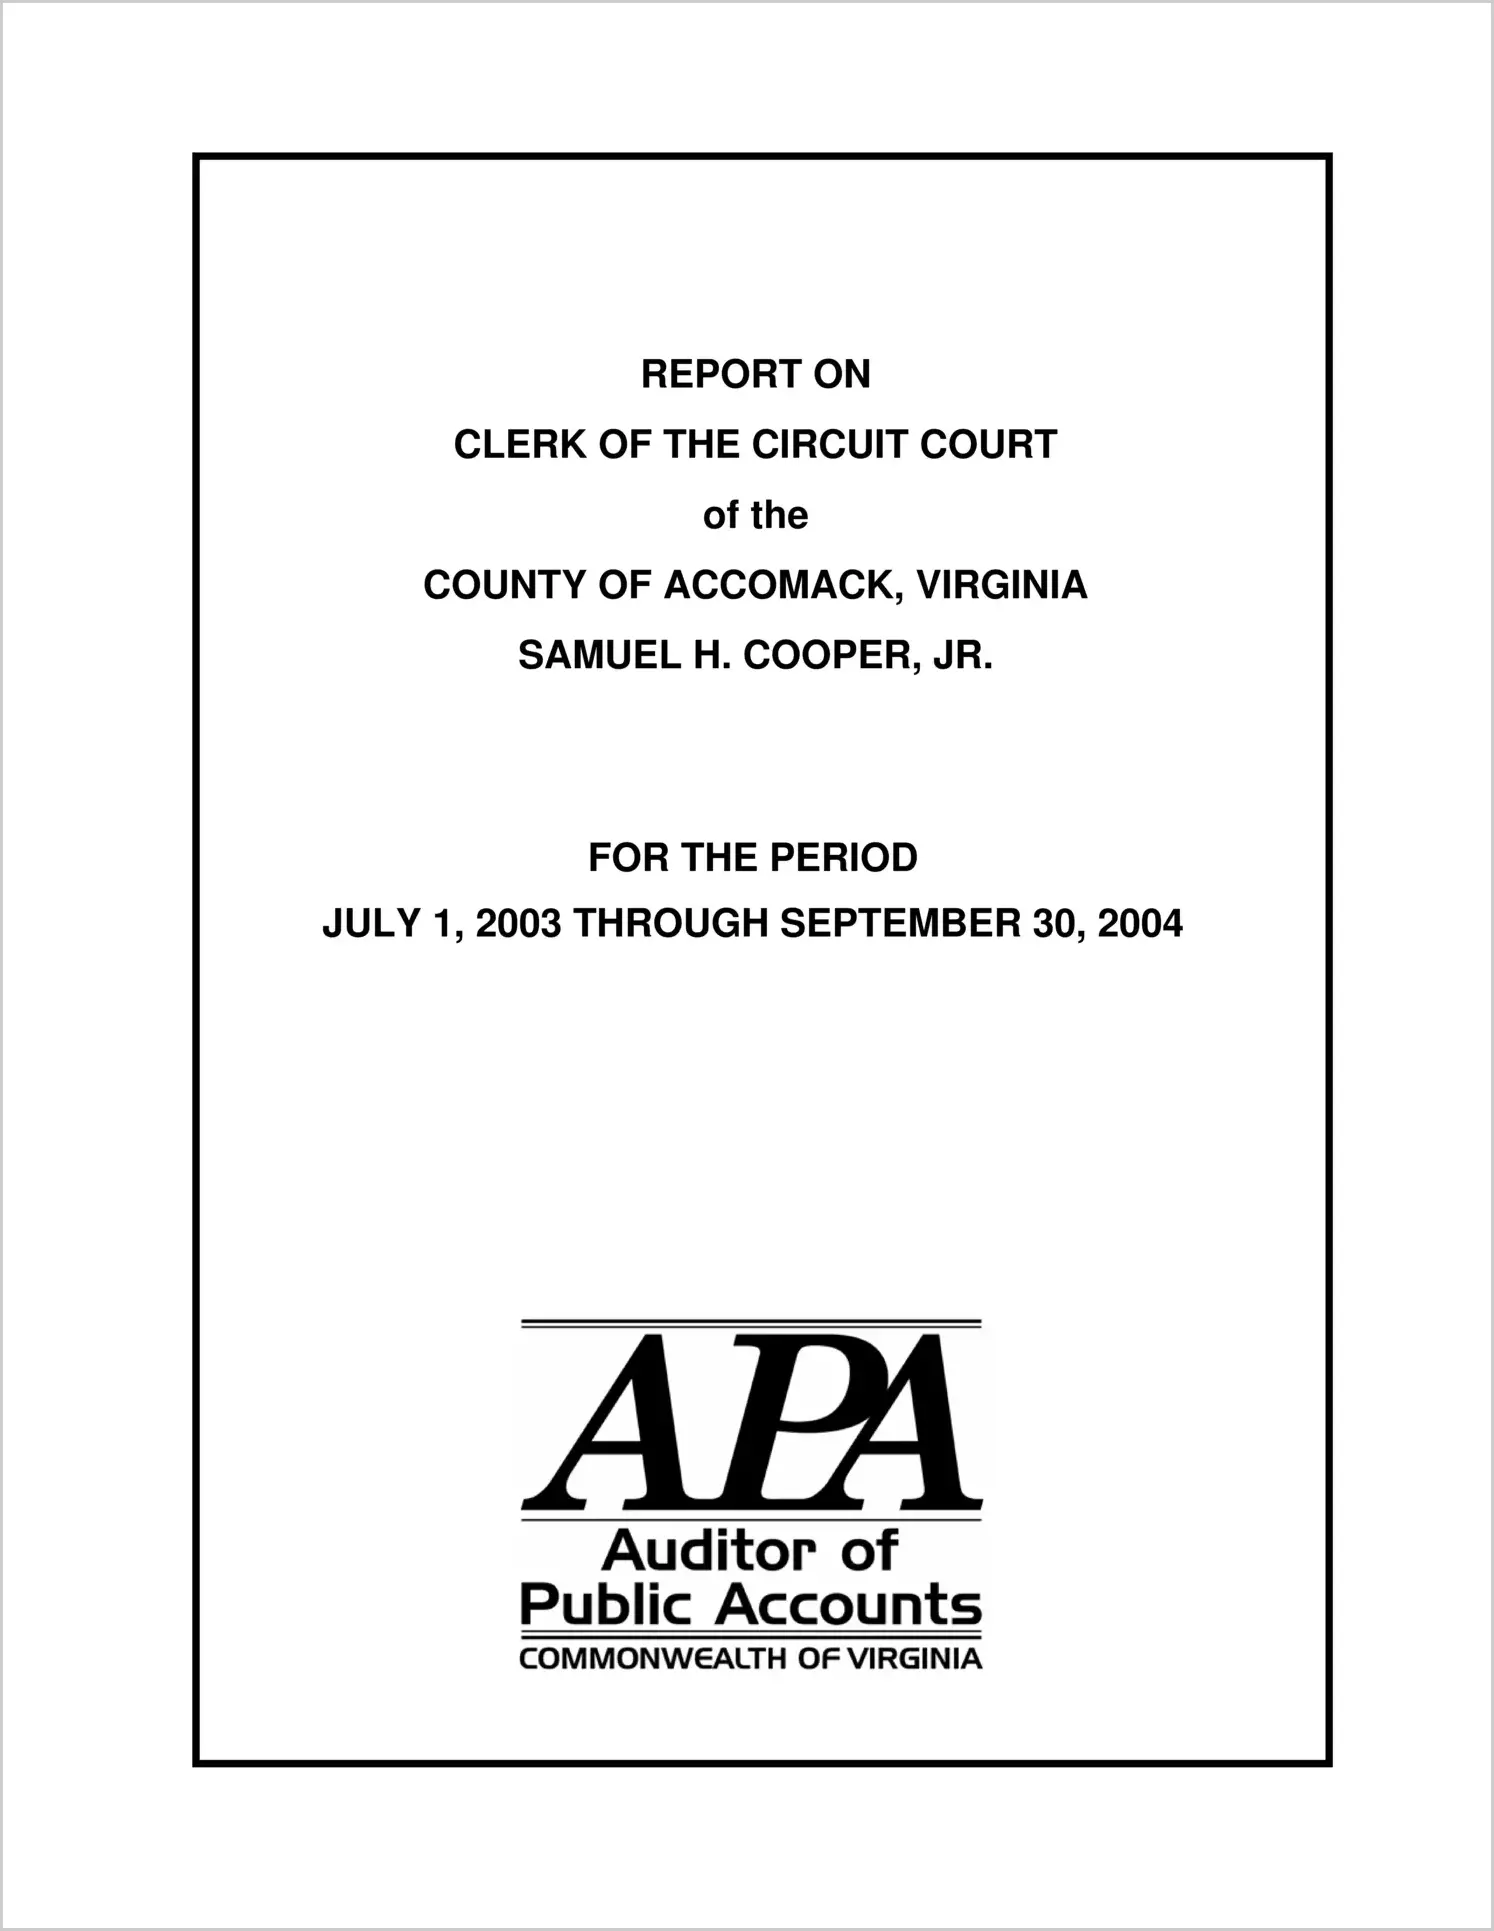 Clerk of the Circuit Court of the County of Accomack for the period July 1, 2003 through September 30, 2004